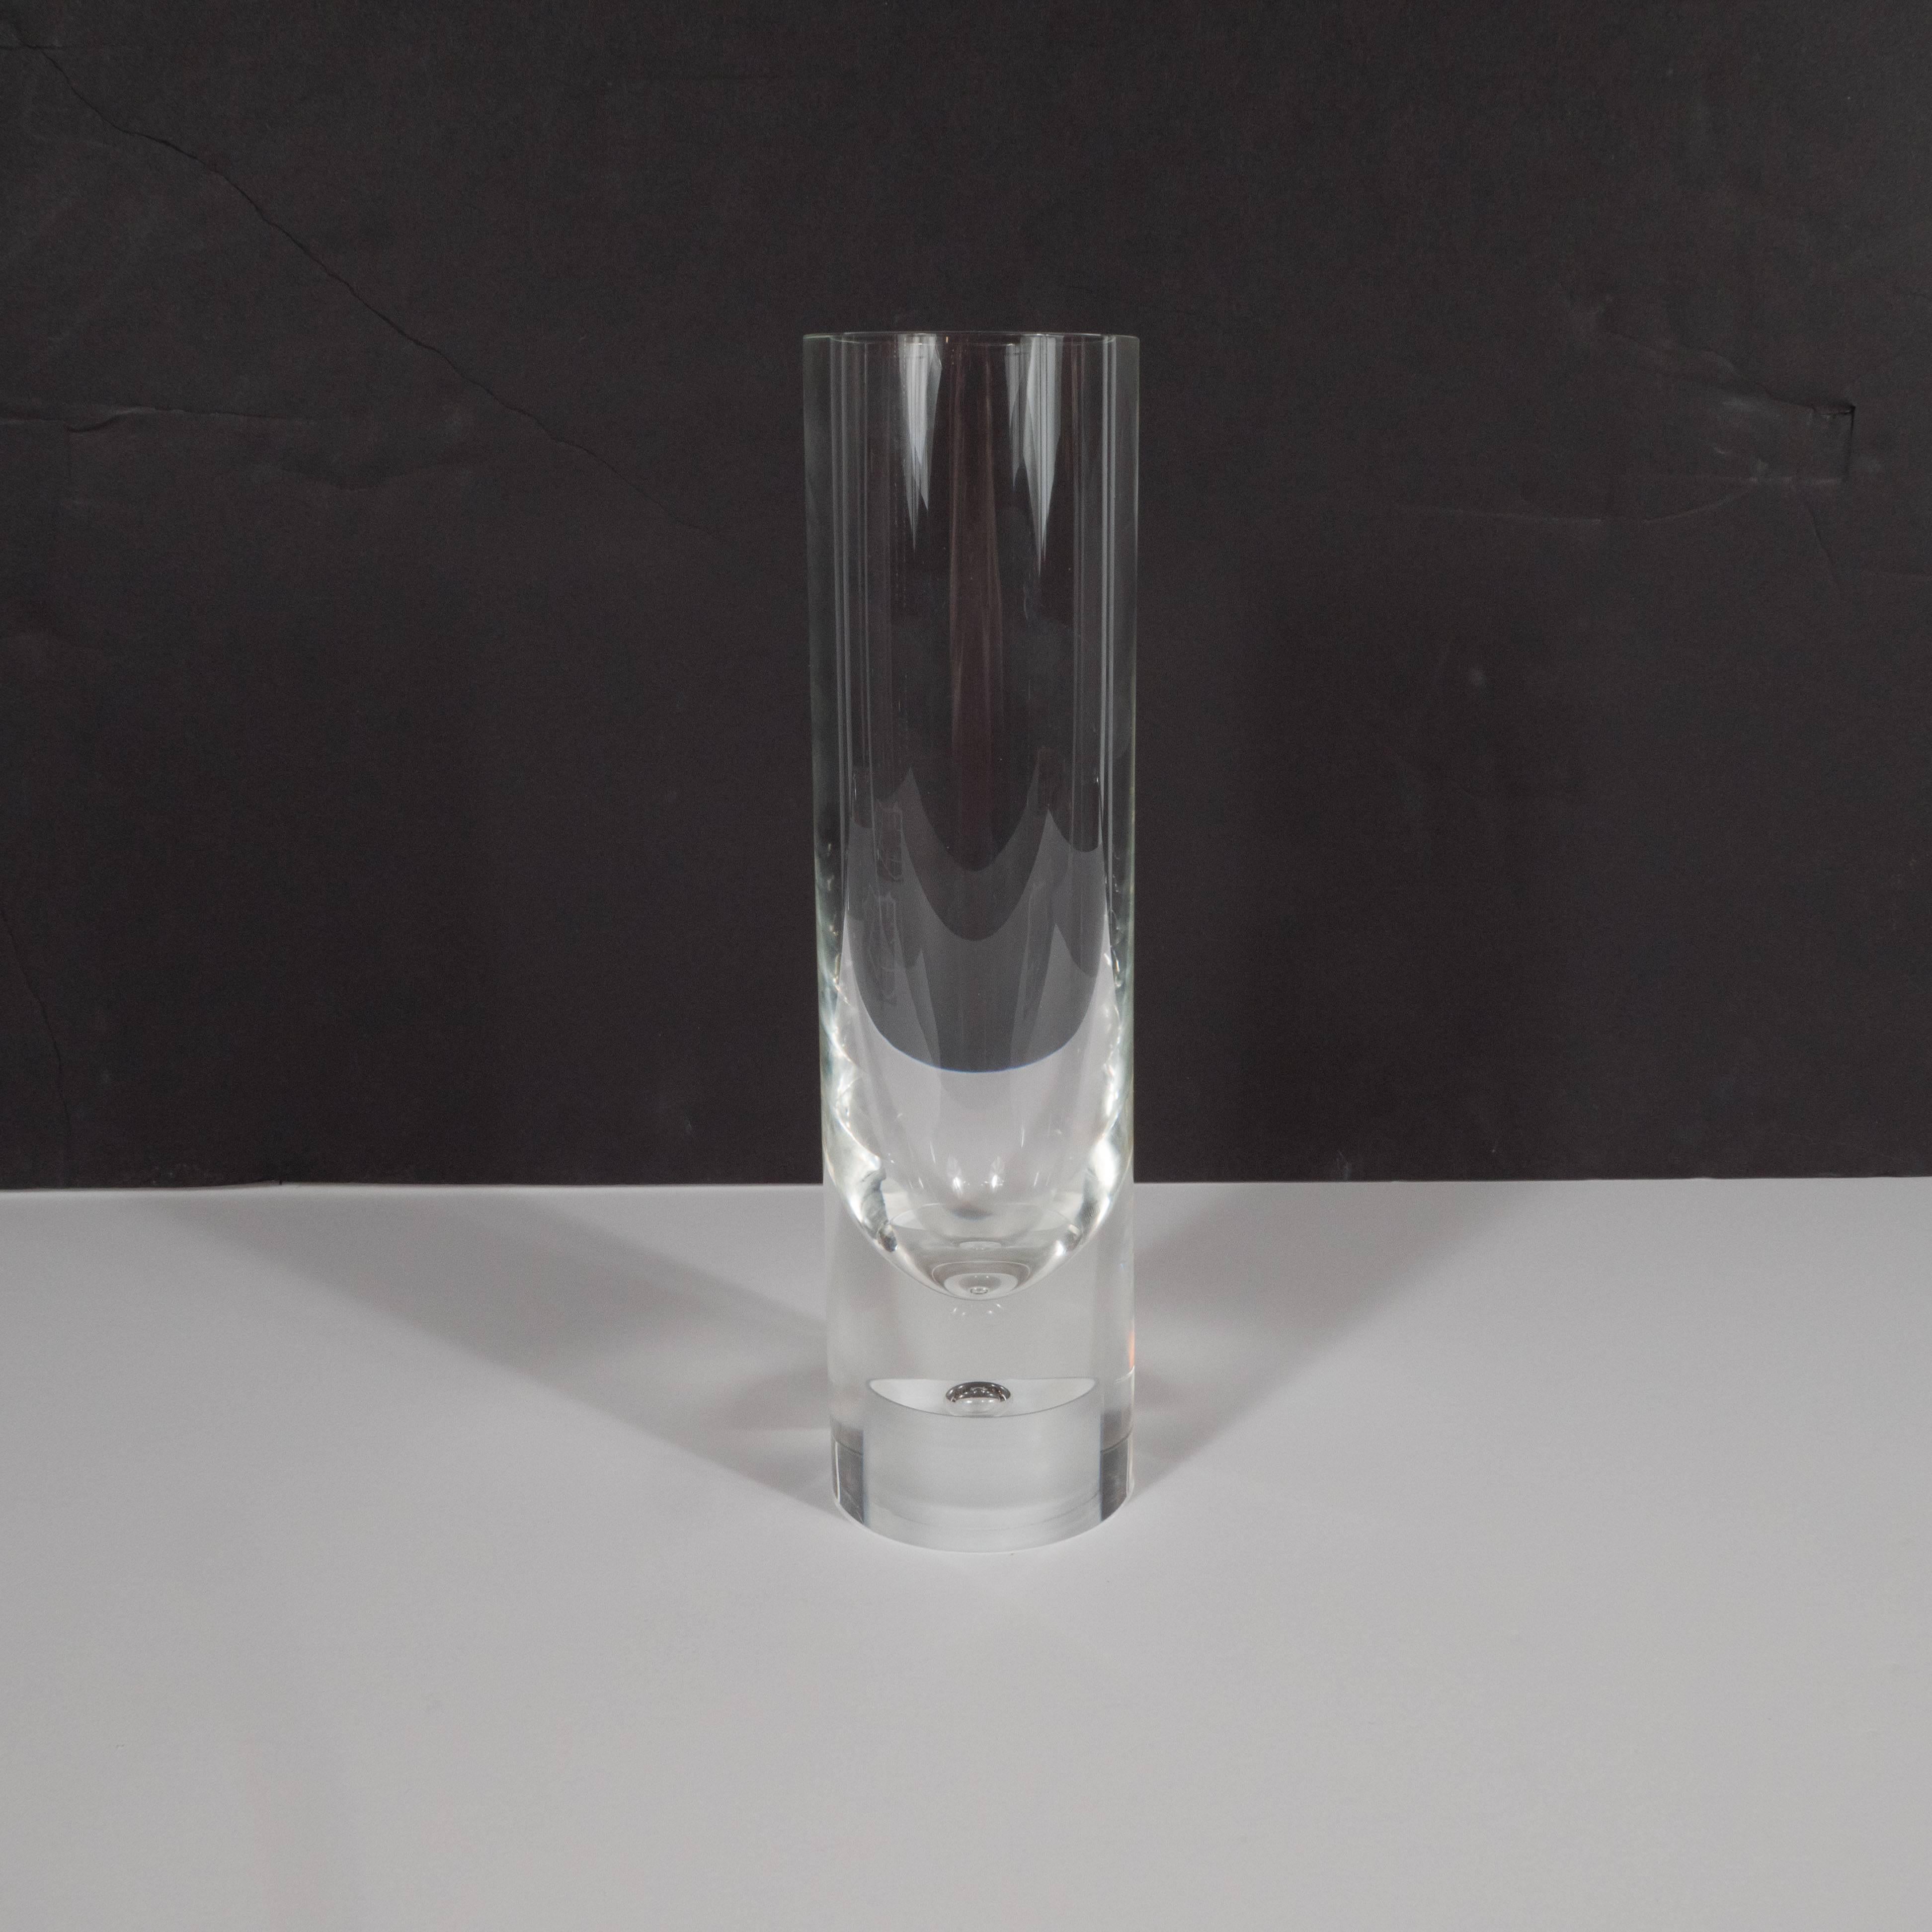 This refined clear glass vase was realized by Steuben Glass Works, of Corning New York, circa 1970. Steuben, founded in 1903, represents one of the most storied names in American blown glass of the 20th century. With its impeccable craftsmanship-